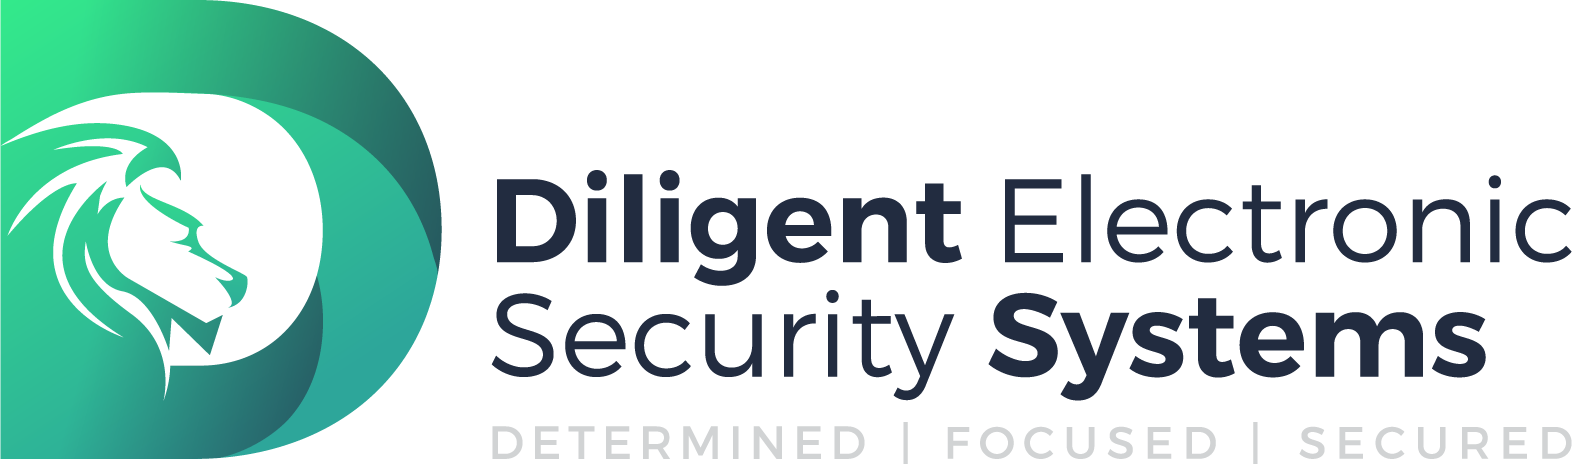 Diligent Electronic Security Systems, LLC